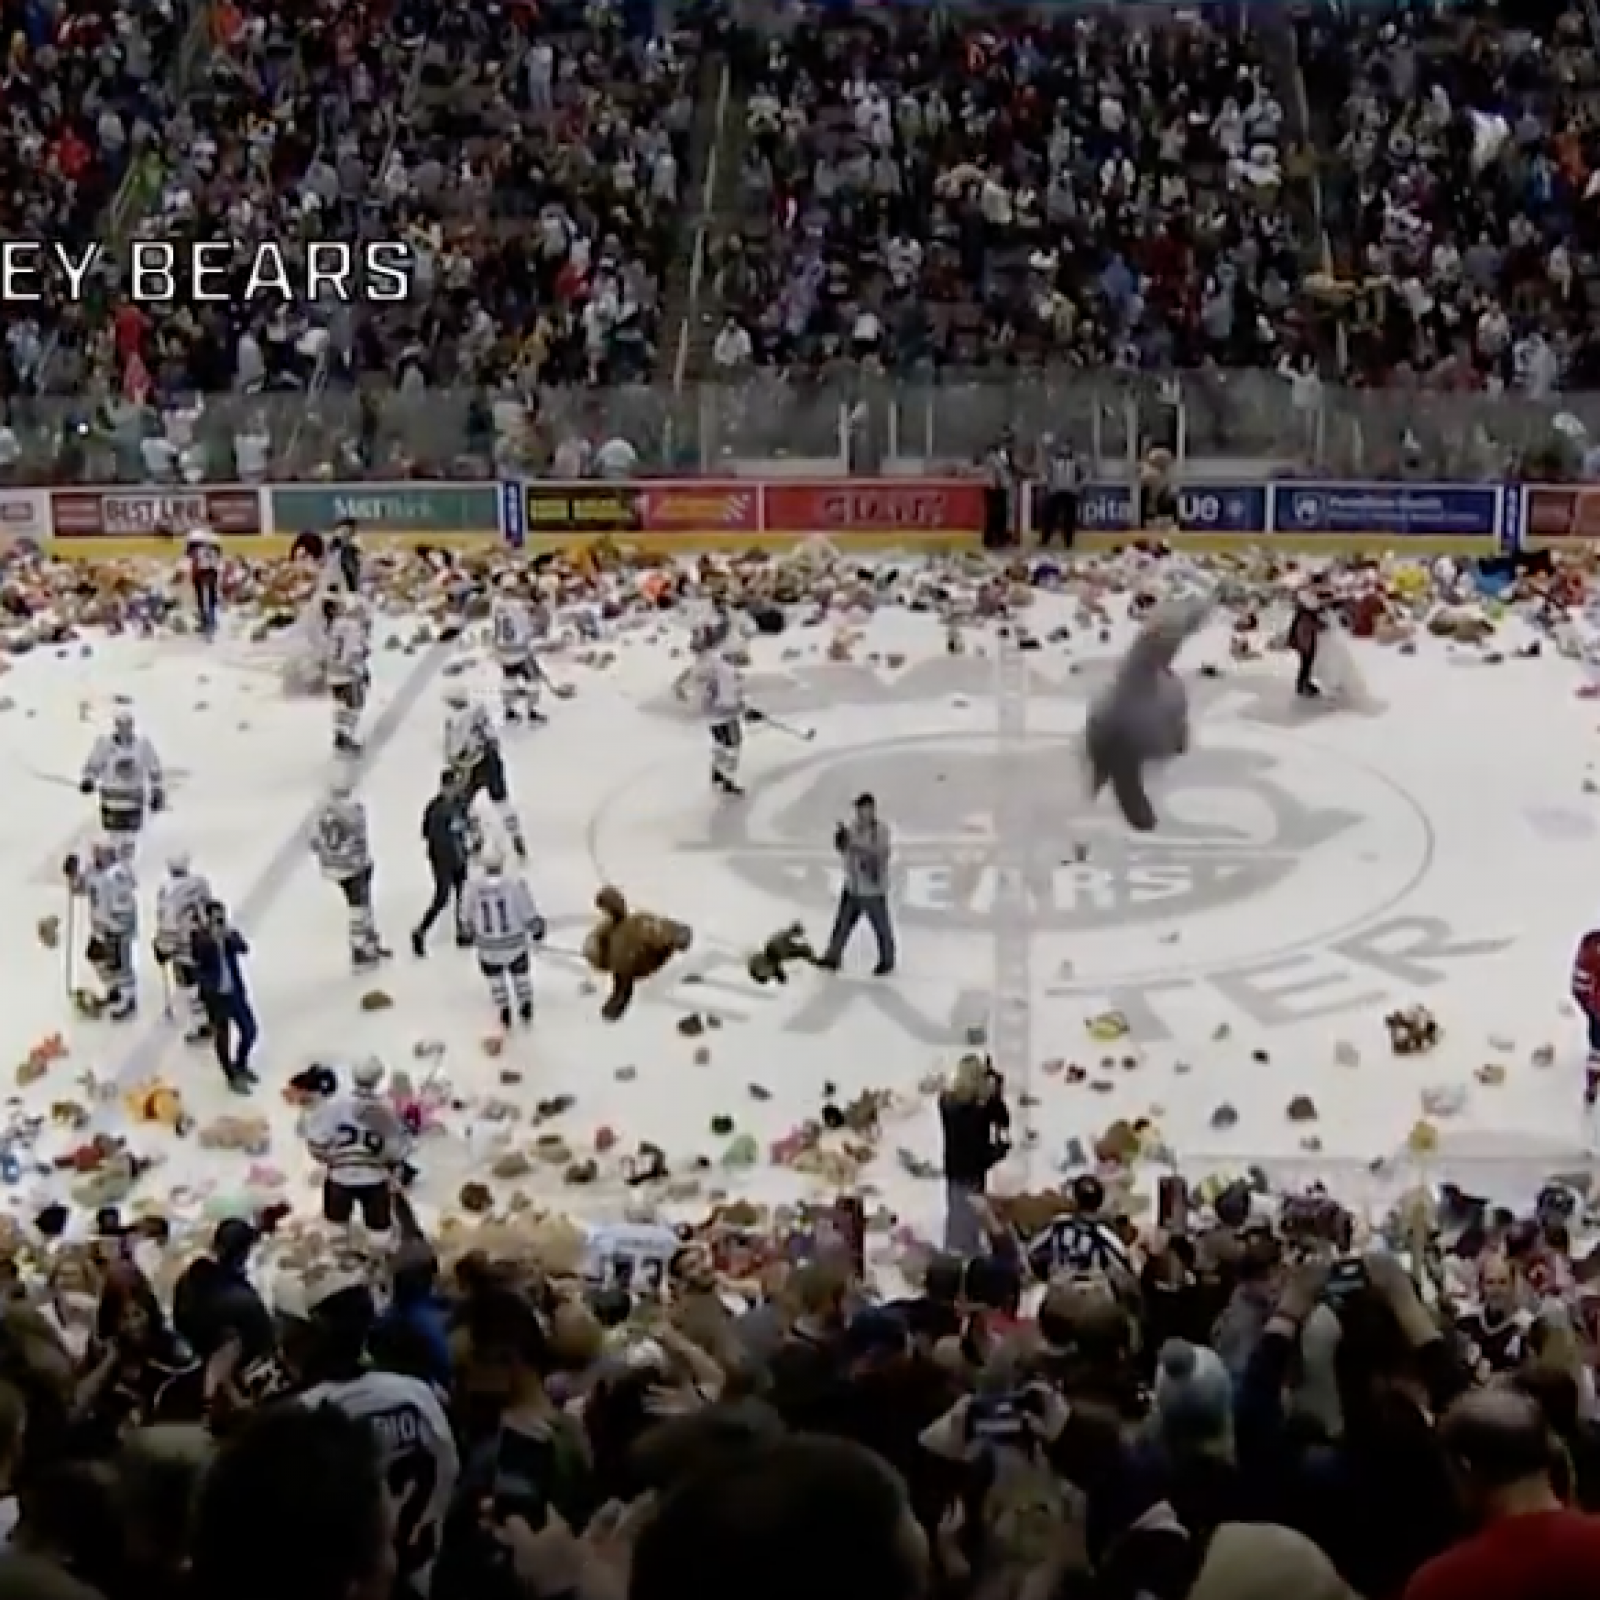 Hockey Fans Toss So Many Stuffed Animals During A Game It Breaks A World  Record